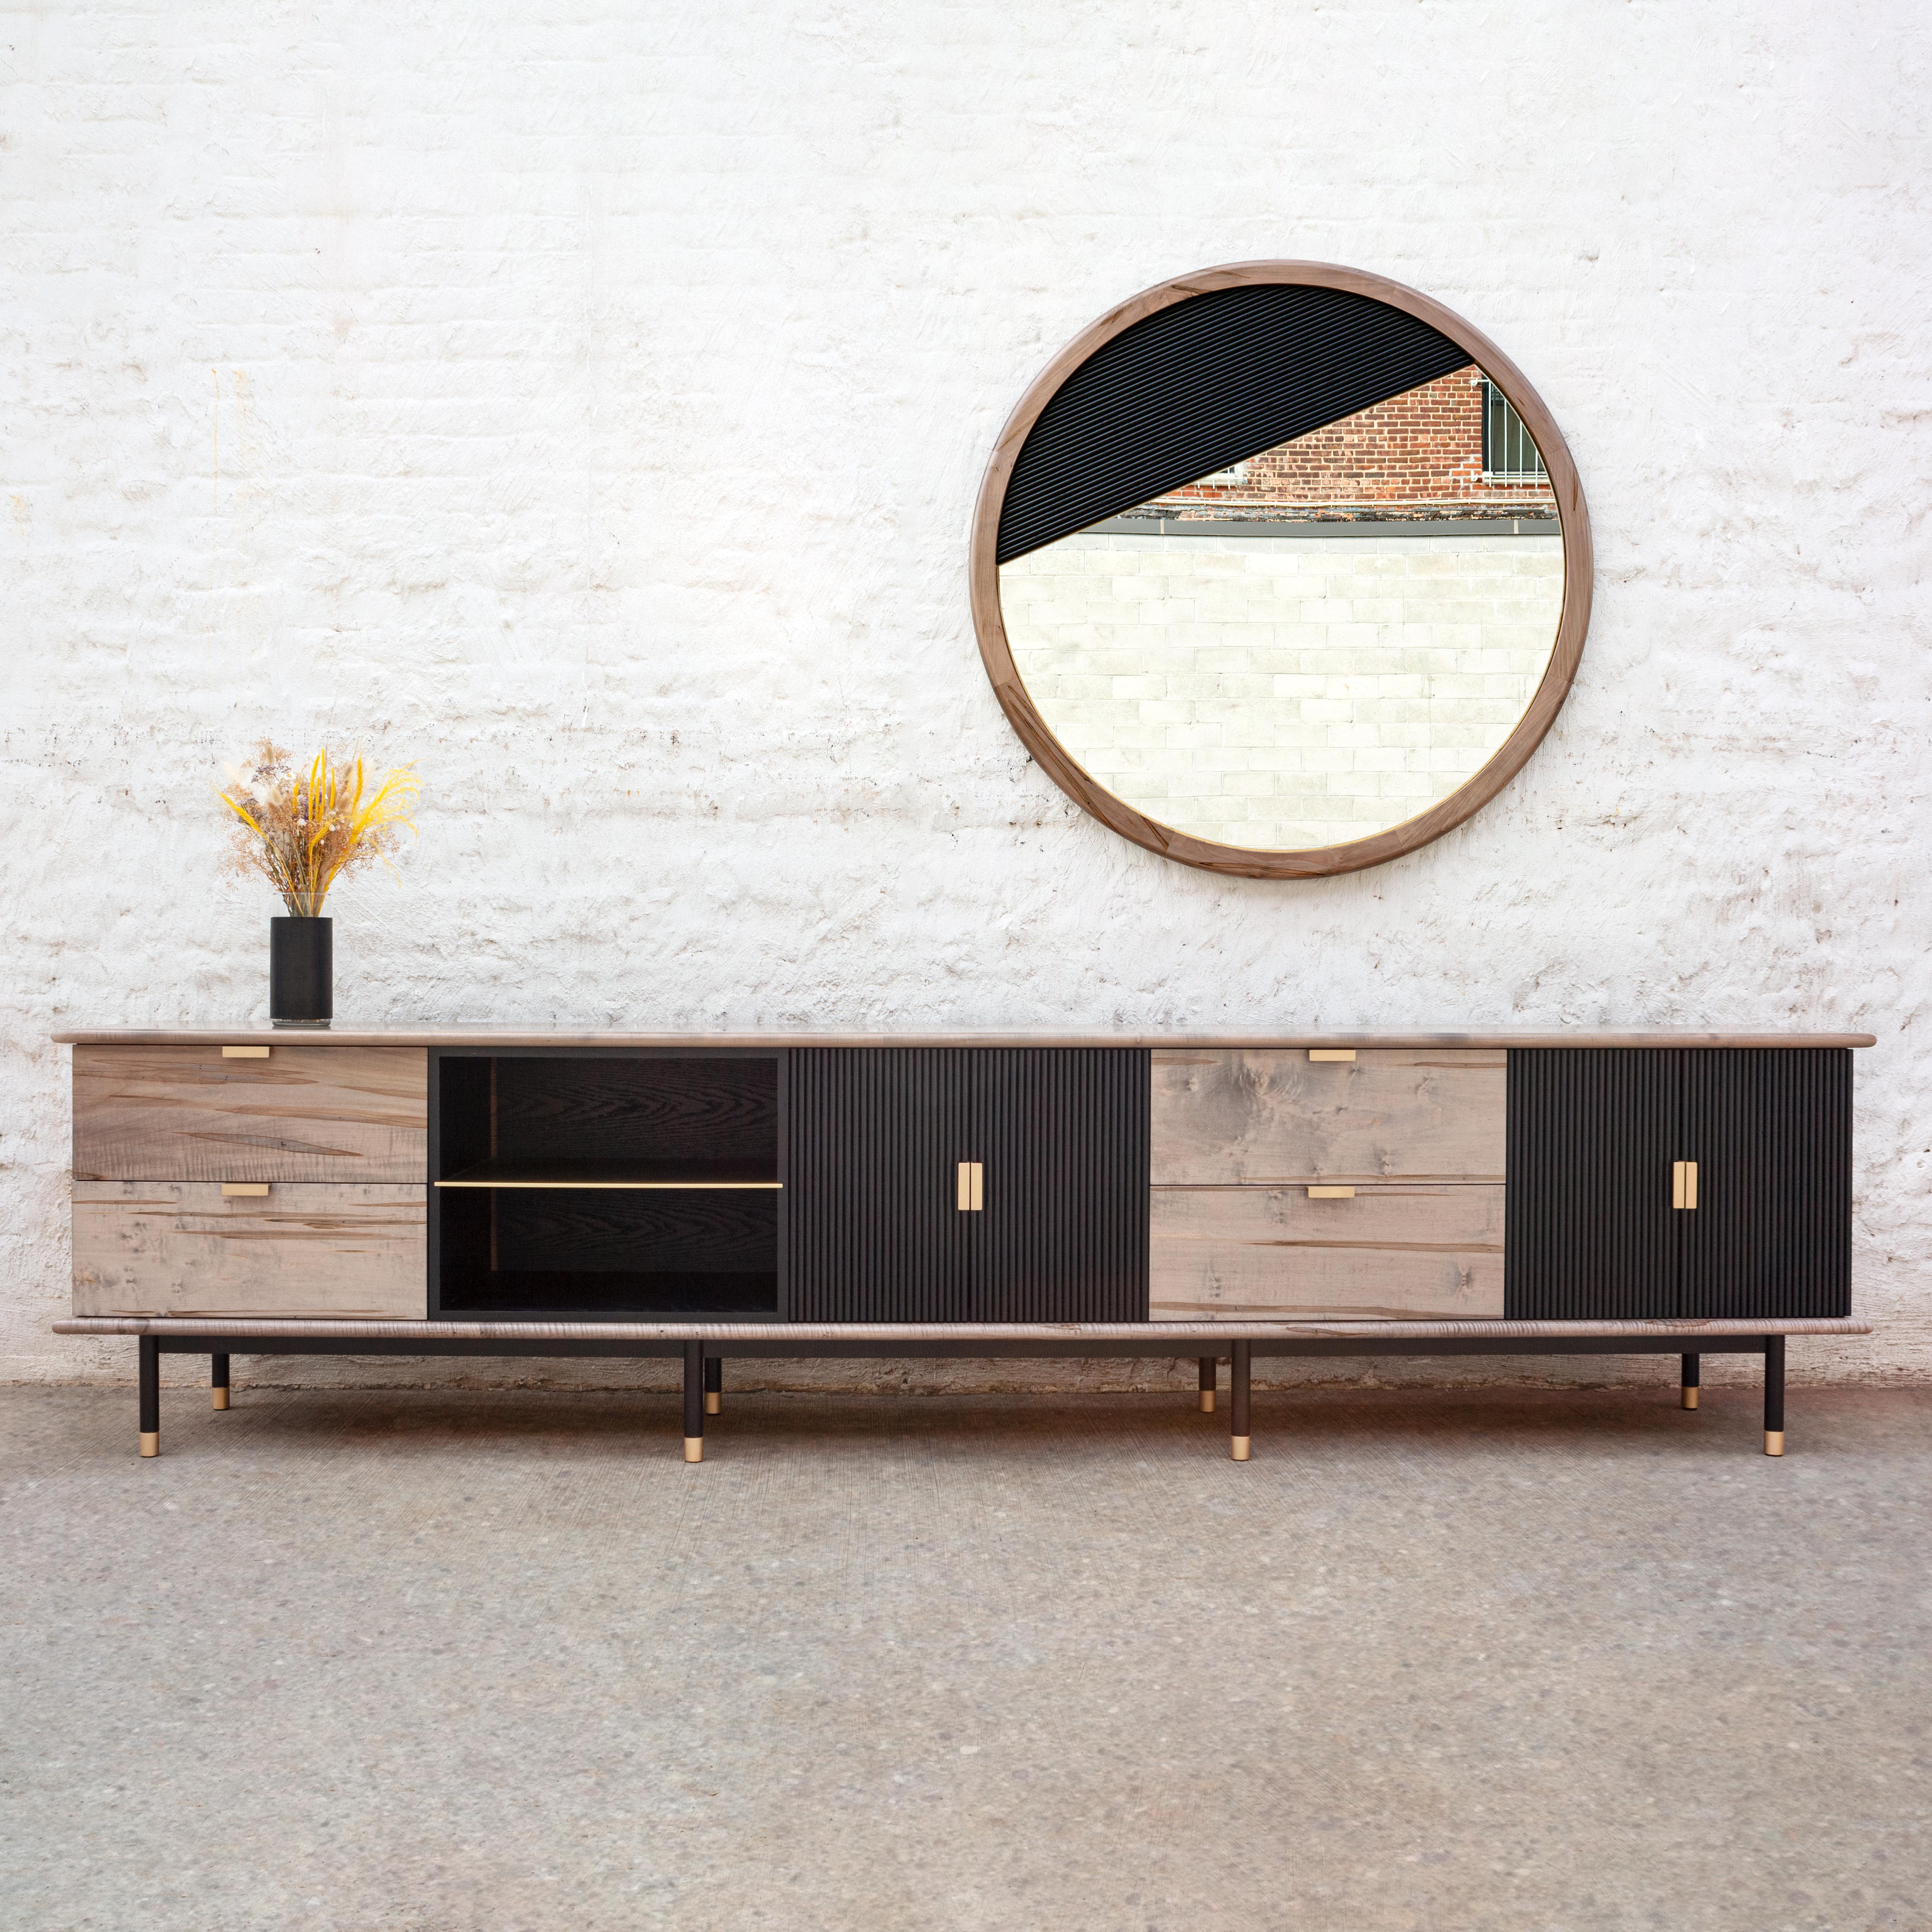 Some of our greatest ideas are born from custom projects. Enter our Kenmare credenza: A stunning oversize statement piece with touches pulled from our Jasper collection. This special collaboration, with designer Melanie Morris, debuts handcrafted